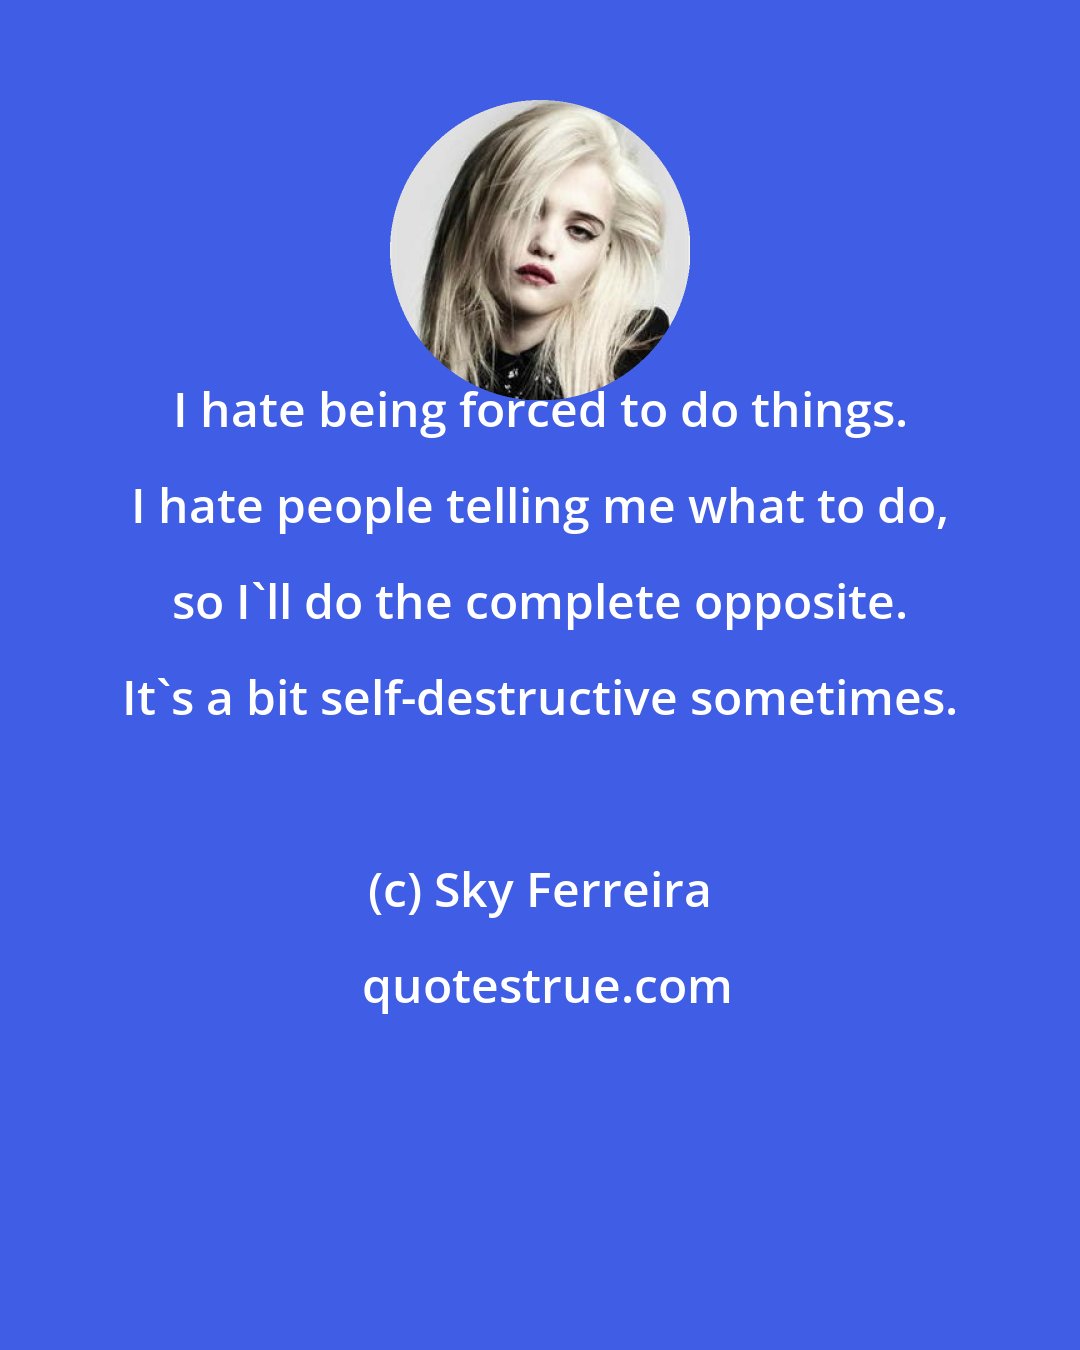 Sky Ferreira: I hate being forced to do things. I hate people telling me what to do, so I'll do the complete opposite. It's a bit self-destructive sometimes.